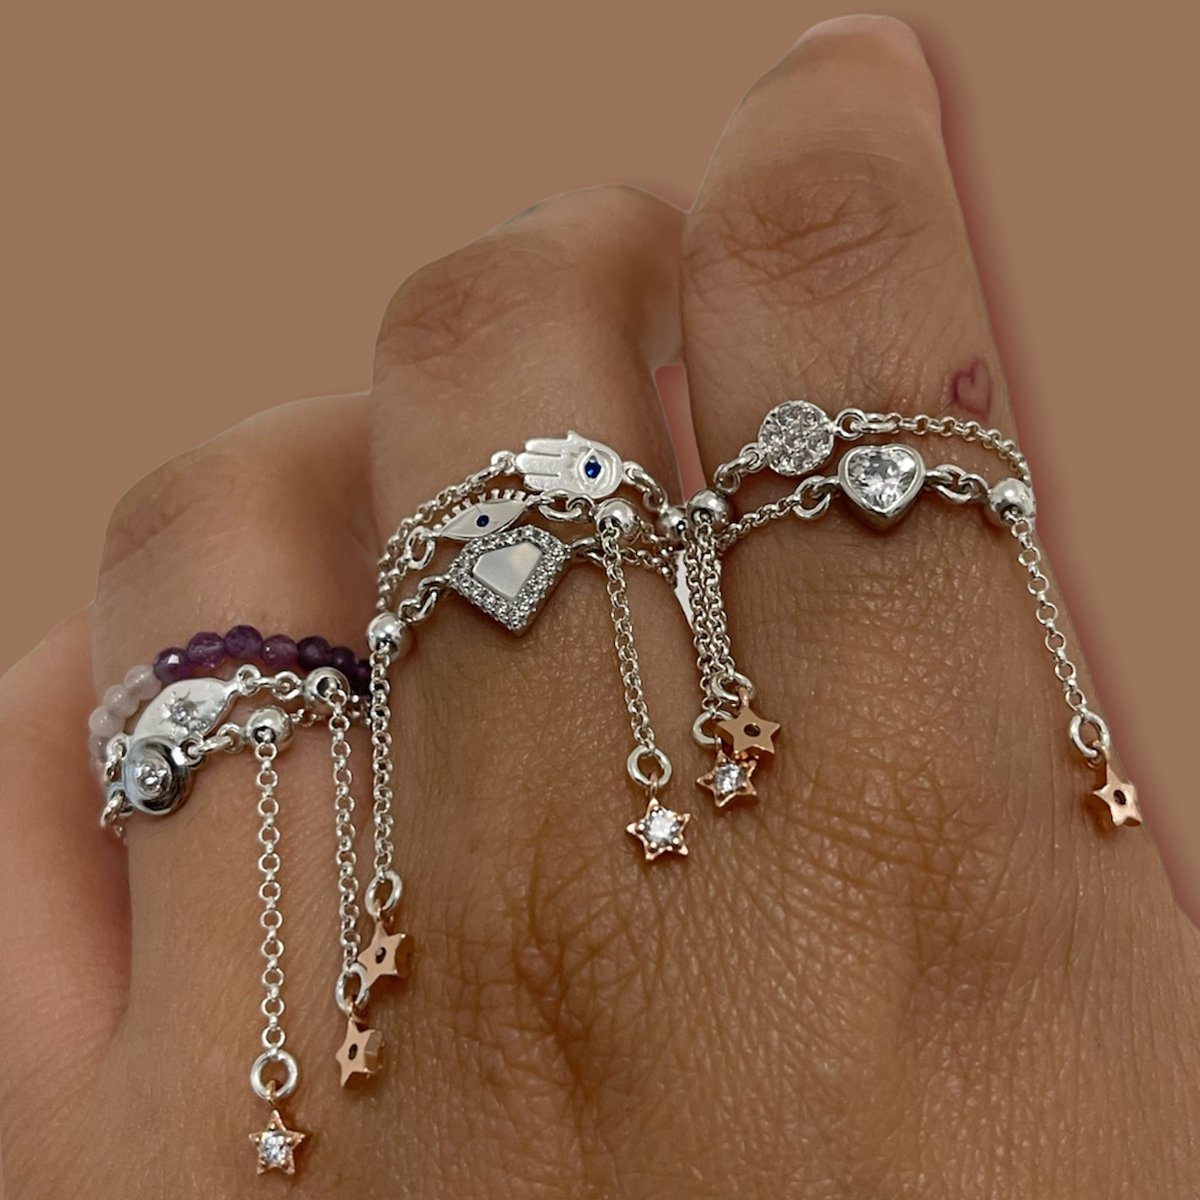 Image of Adjustable charm and chain ring